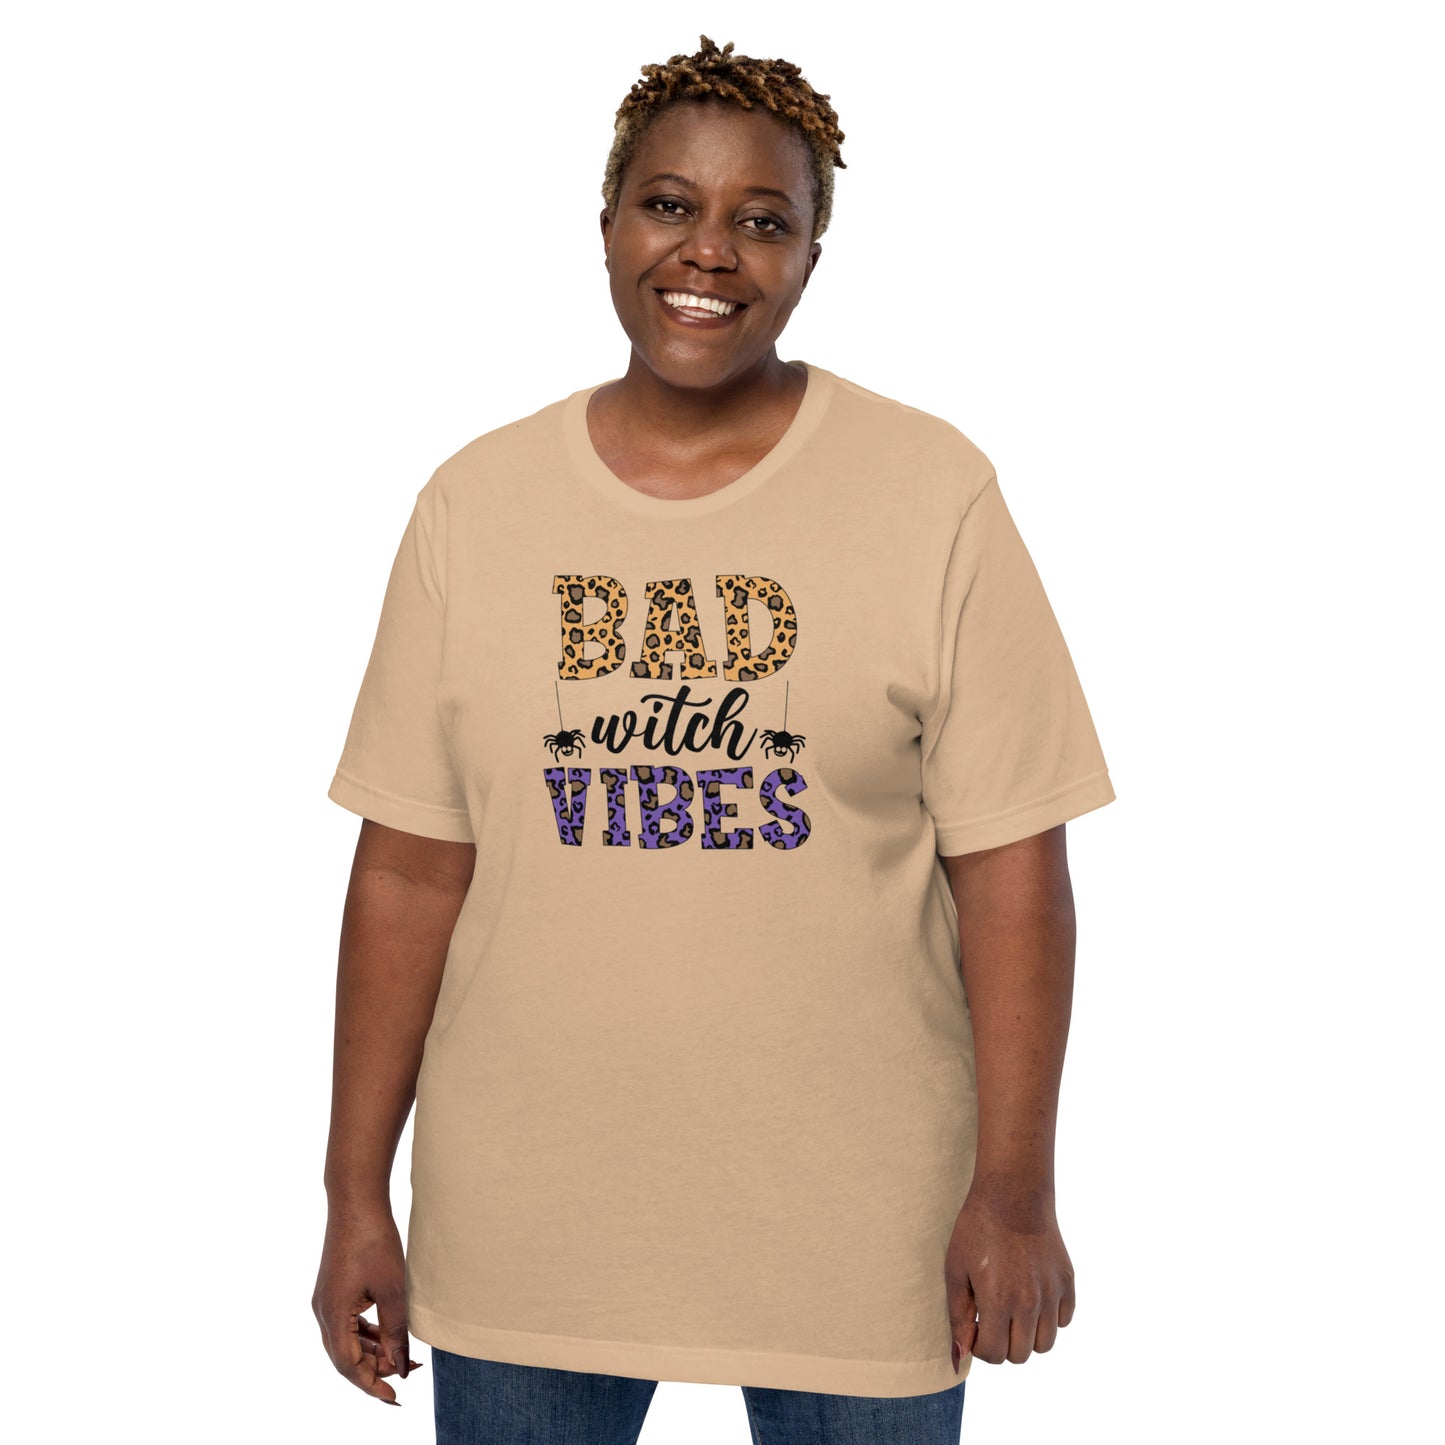 Bad Witch Vibes Unisex t-shirt